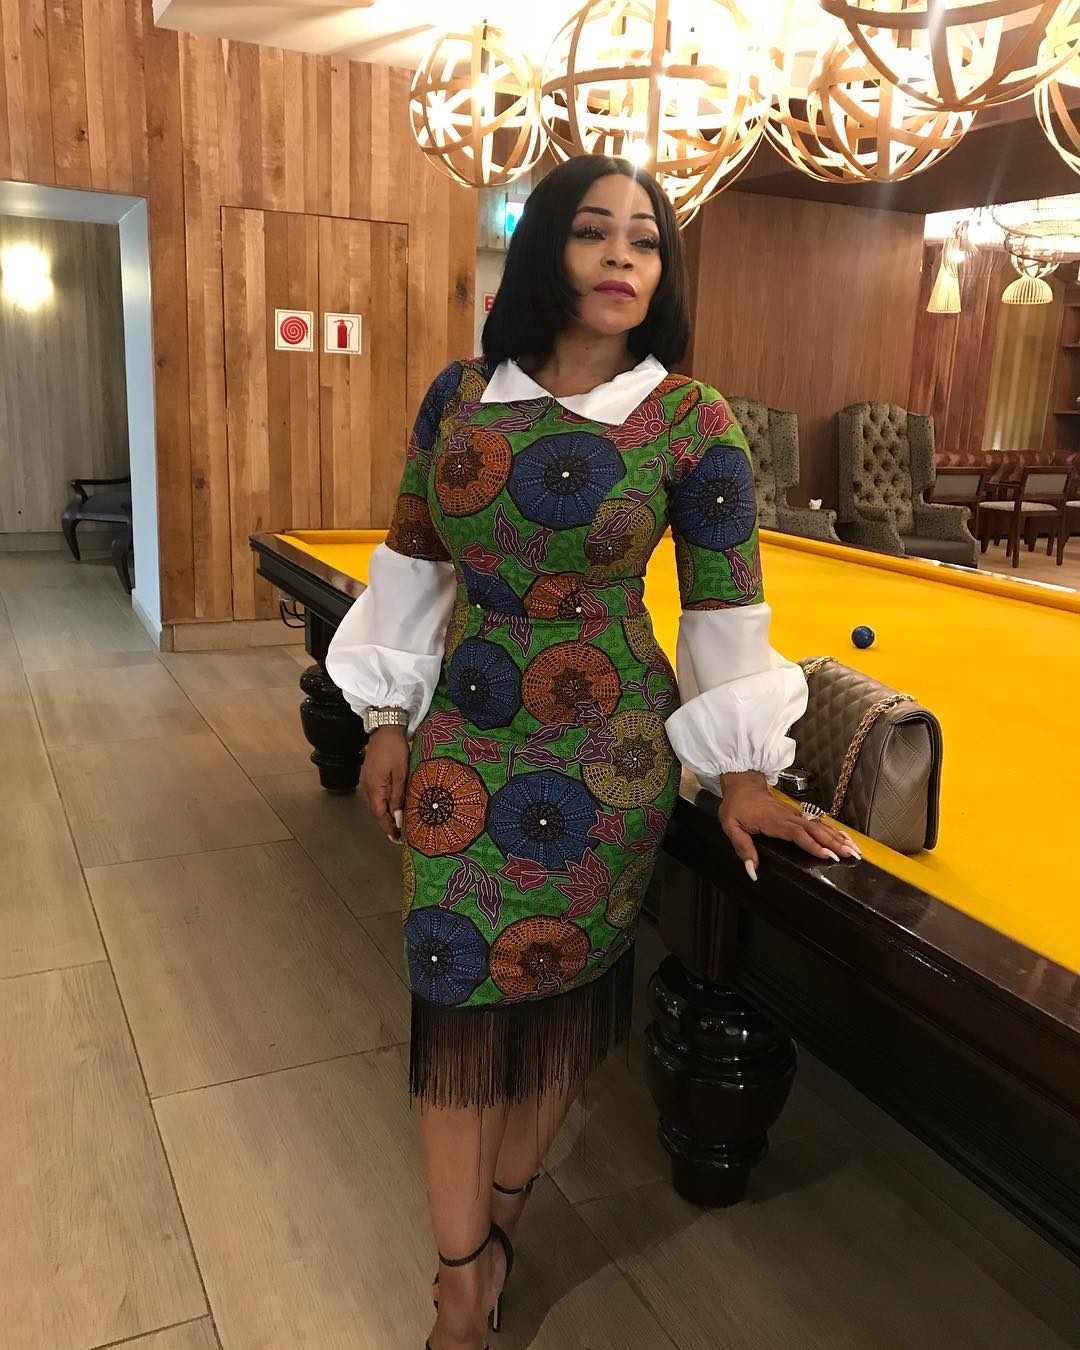 Did You See These Amazing Hot Ankara Looks?